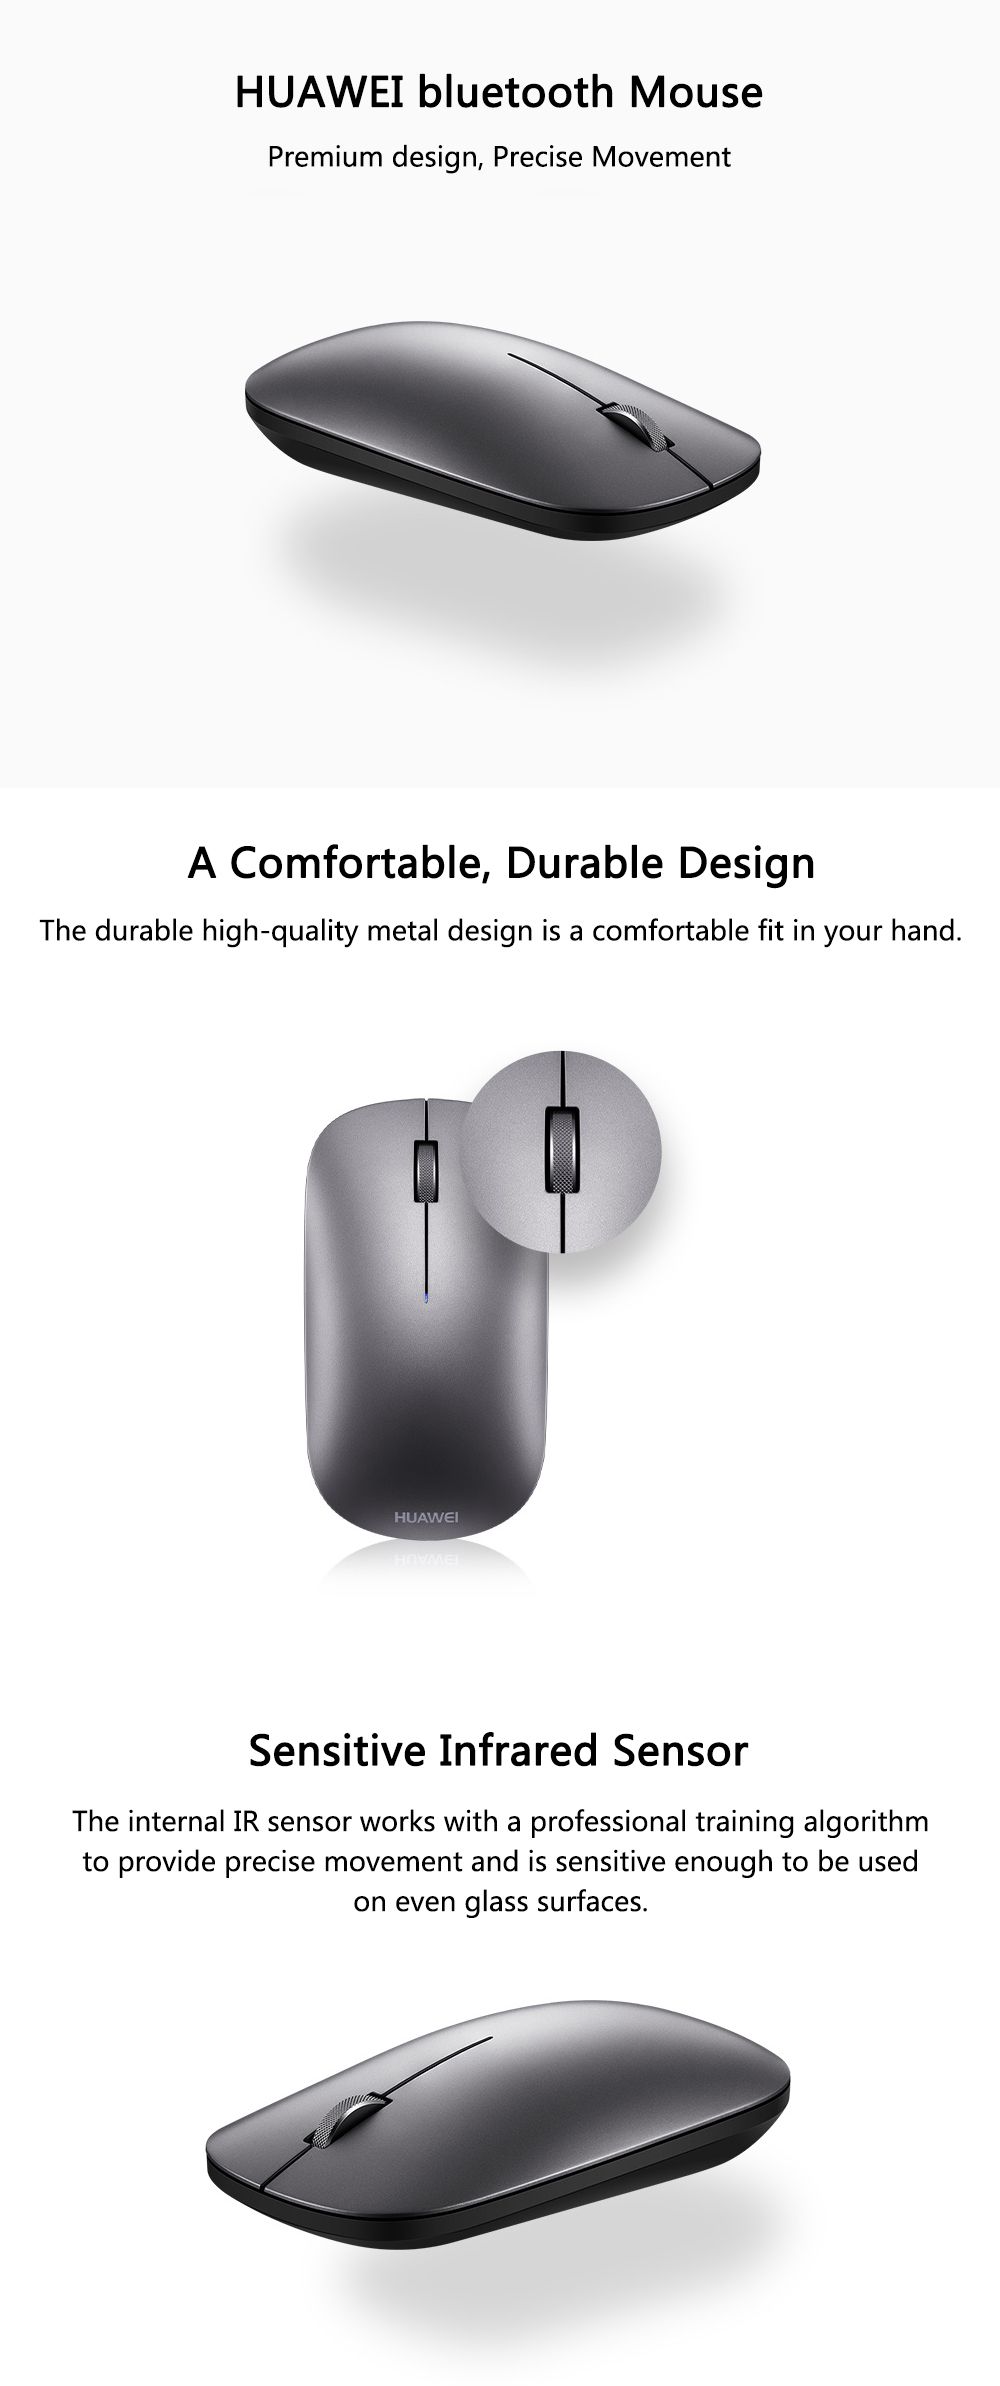 HUAWEI-Wireless-bluetooth-Mouse-bluetooth-42-Ergonomic-Mute-Button-Home-Office-Bussiness-Mouse-for-C-1718229